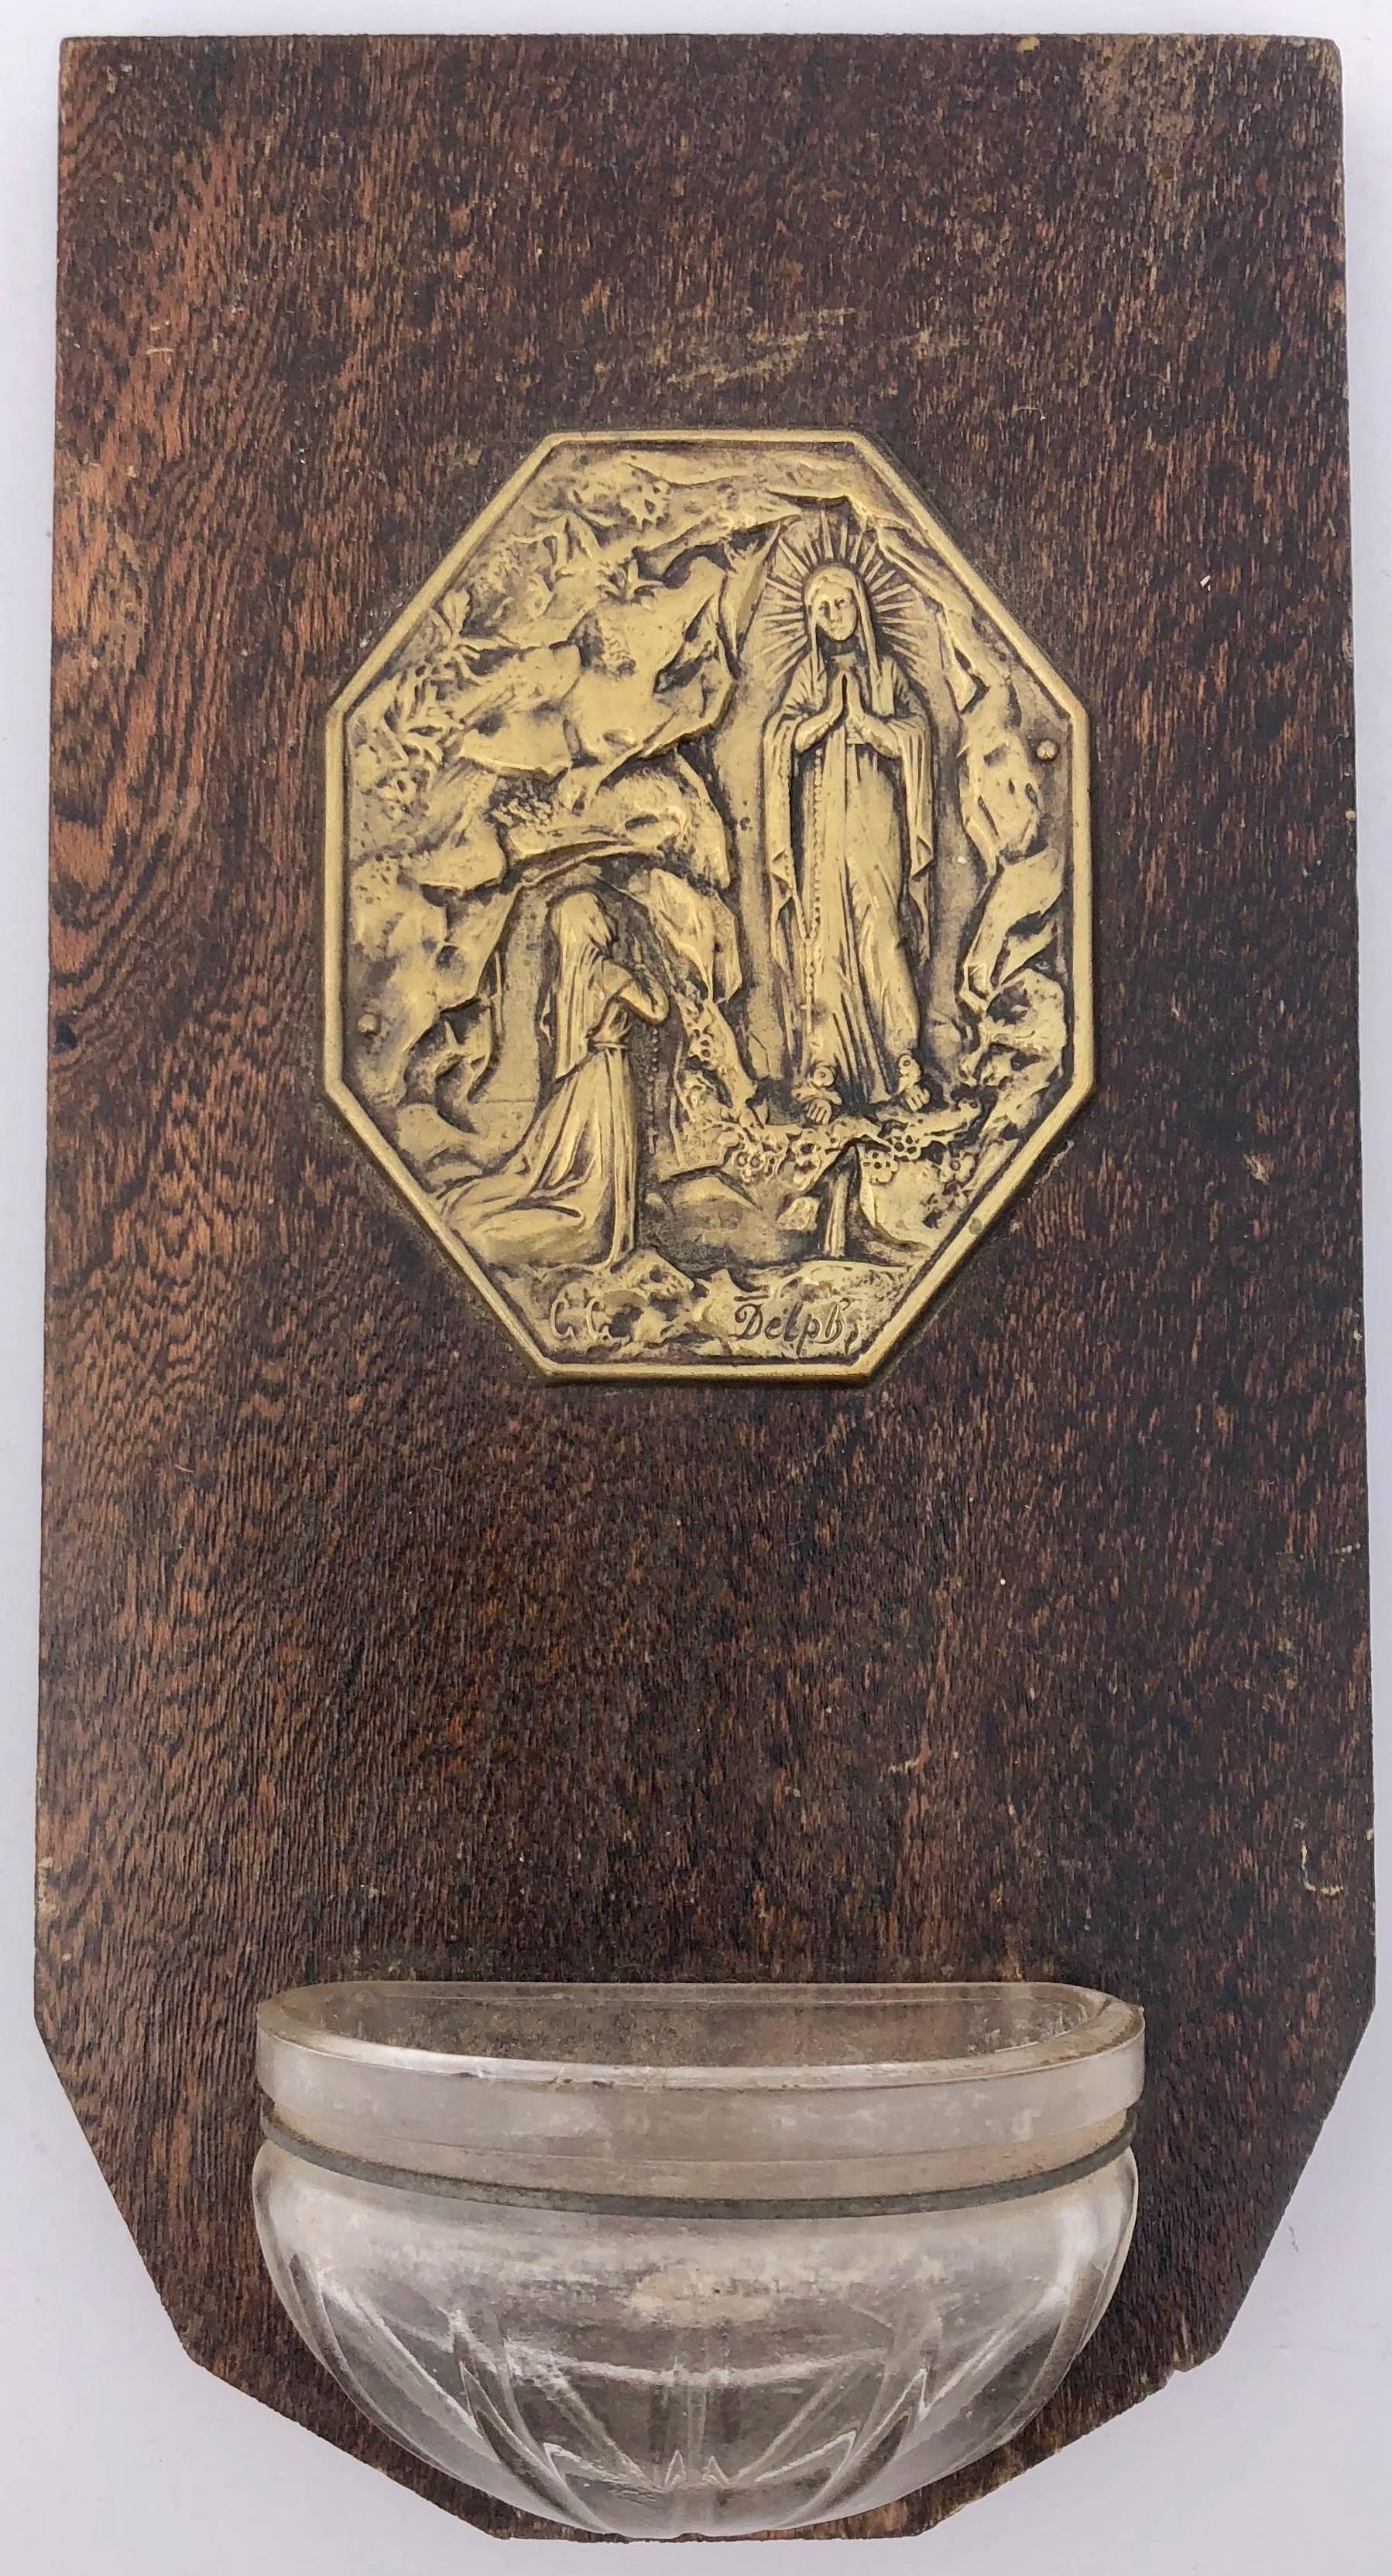 The five French Benetiers have either glass or metal holy water fonts, metal medallions and plaques mounted on wood commemorating the- Miracle of Lourdes, Jesus providing blessings, Mary in profile, St Joan of Arc and a Crucifix. All are from the